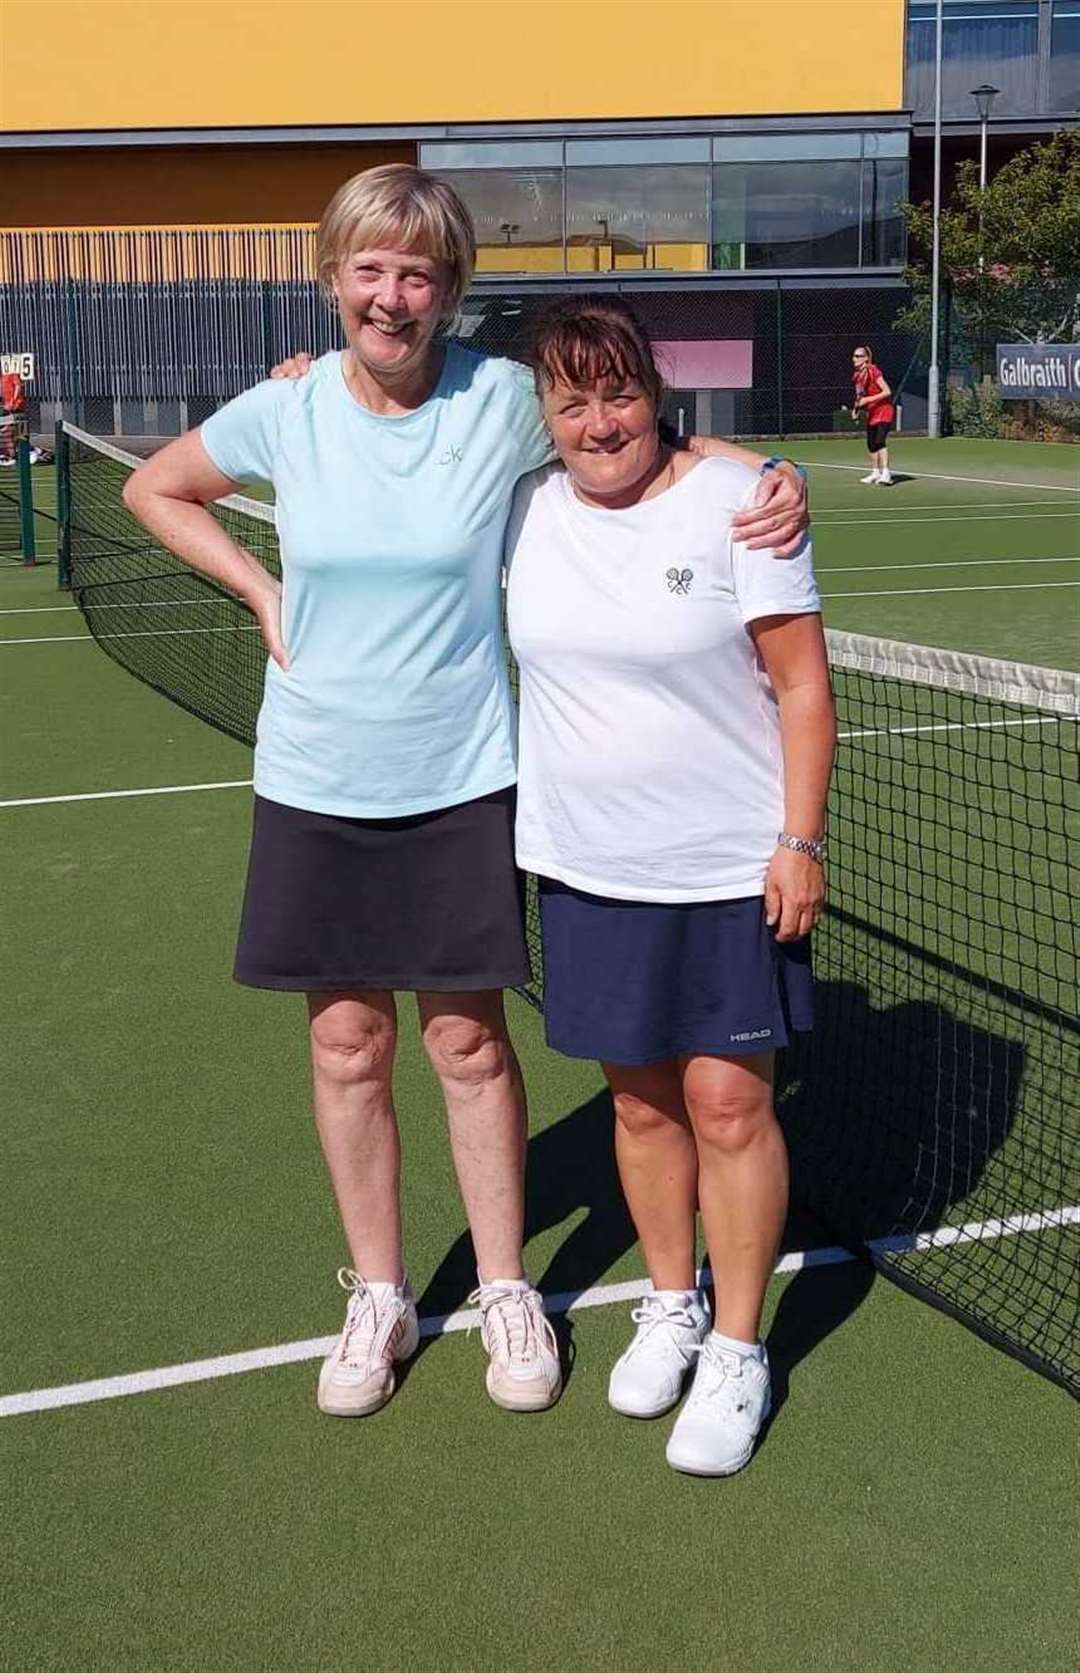 Jane Bradley is the Inverness Tennis Club women's champion after beating Jane Chisholm in straight sets.